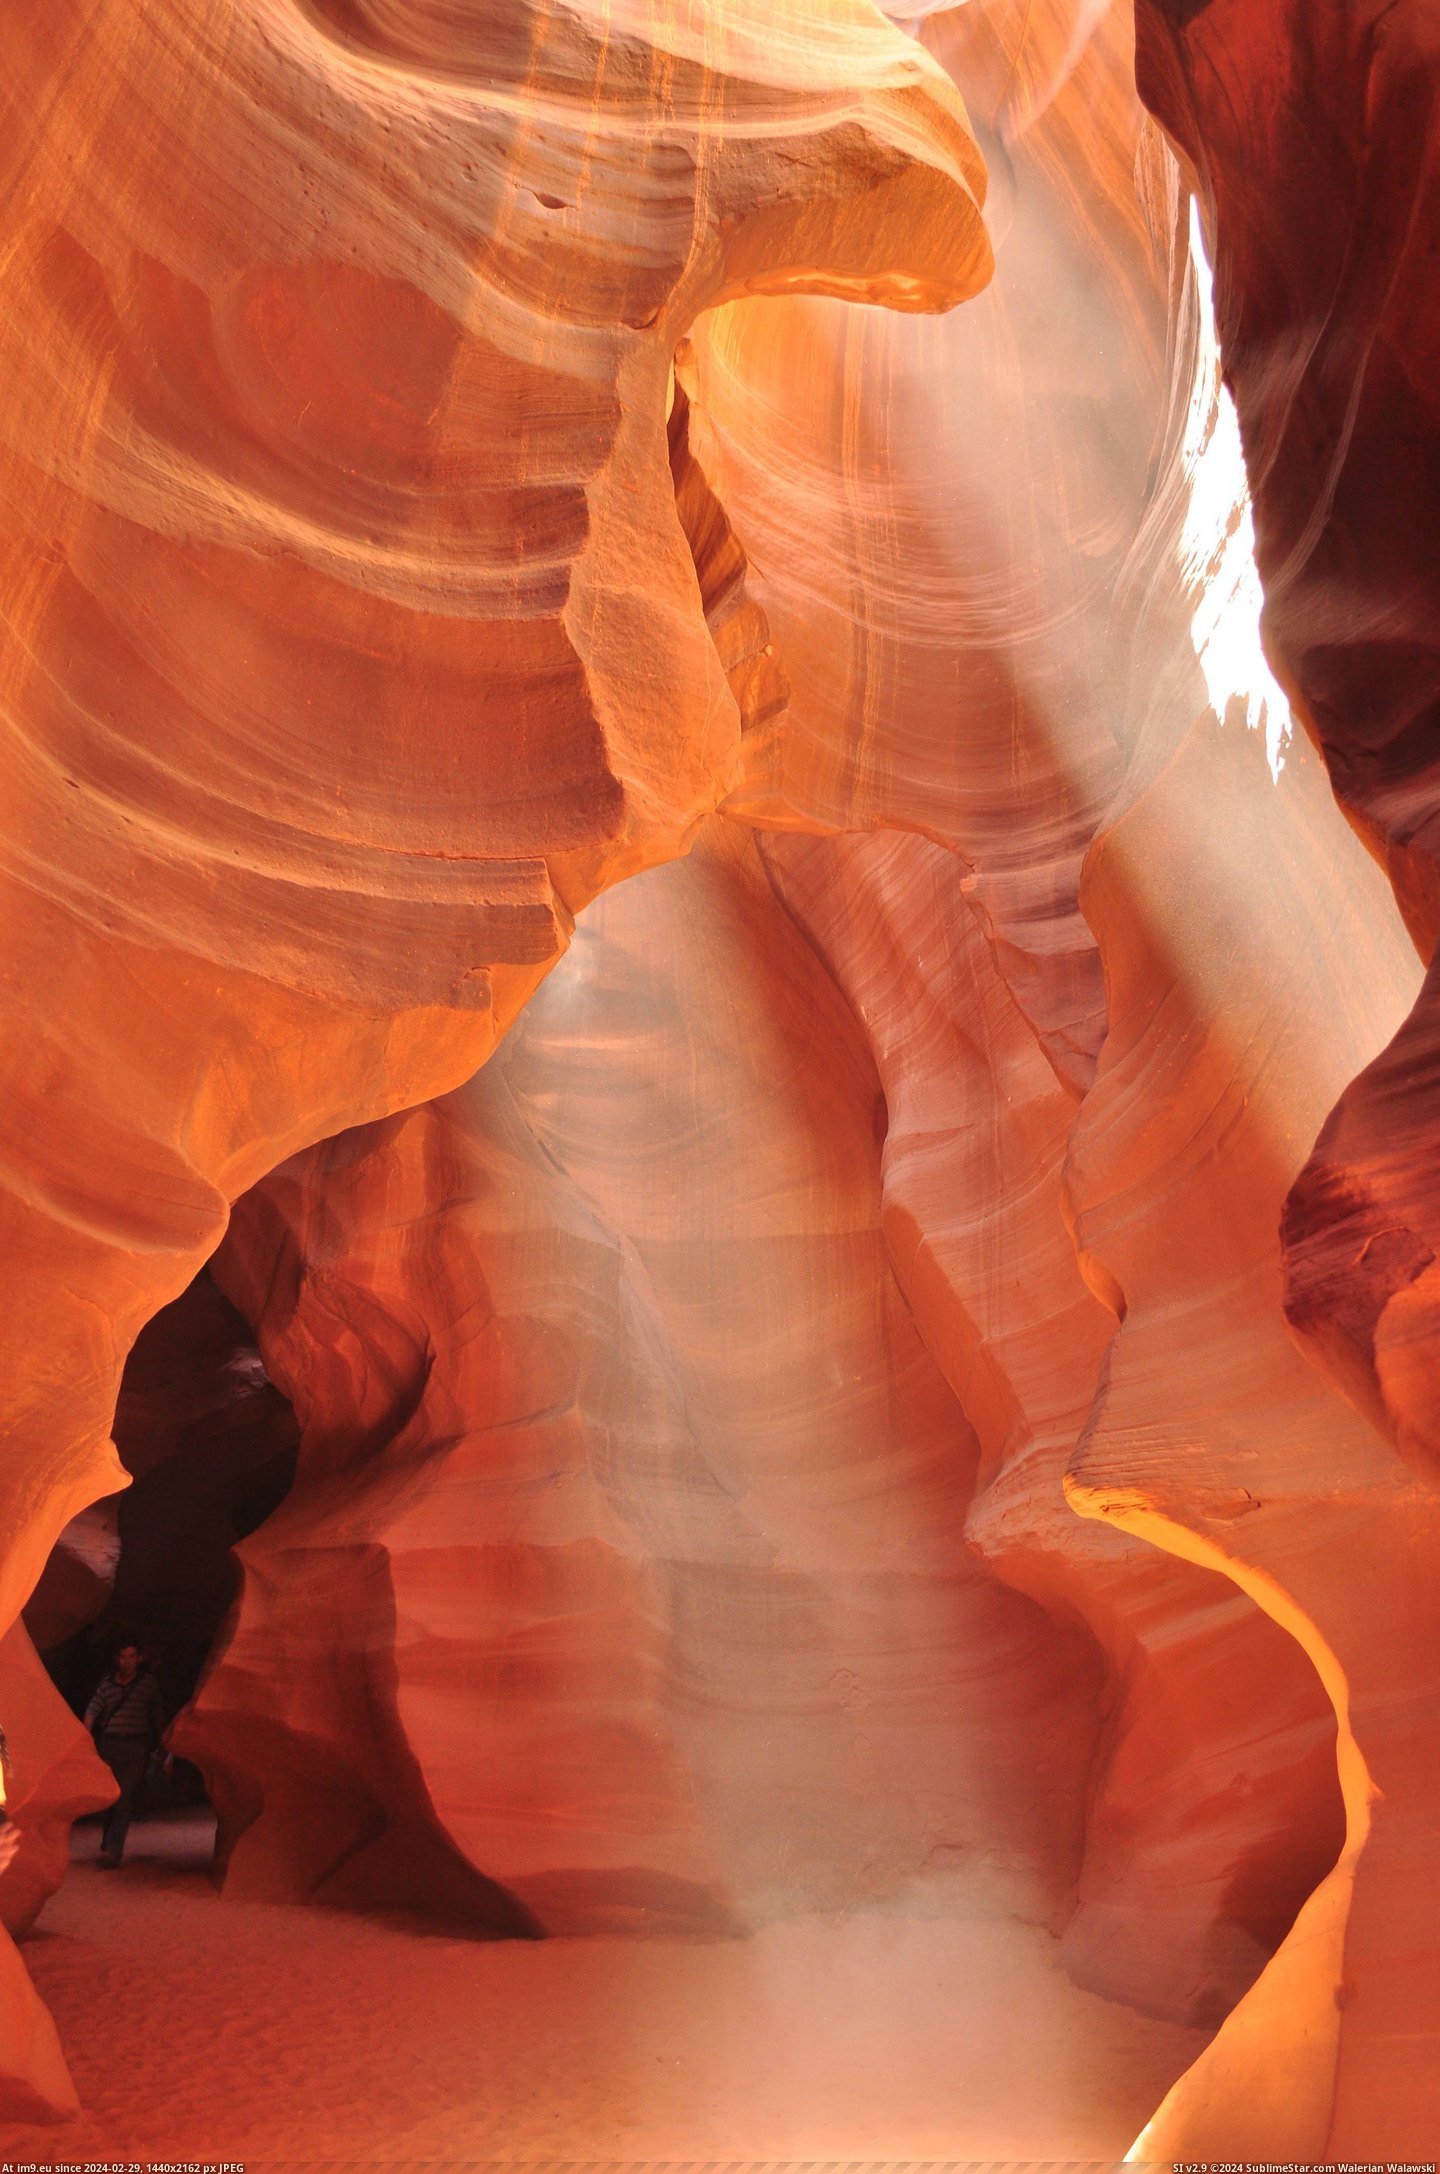 #Photos #Favorite #Walked #Antelope #2848x4288 #Left #Canyon [Earthporn] [OC] Walked through Antelope Canyon and left with 100+ photos, this was my favorite [2848x4288] Pic. (Image of album My r/EARTHPORN favs))